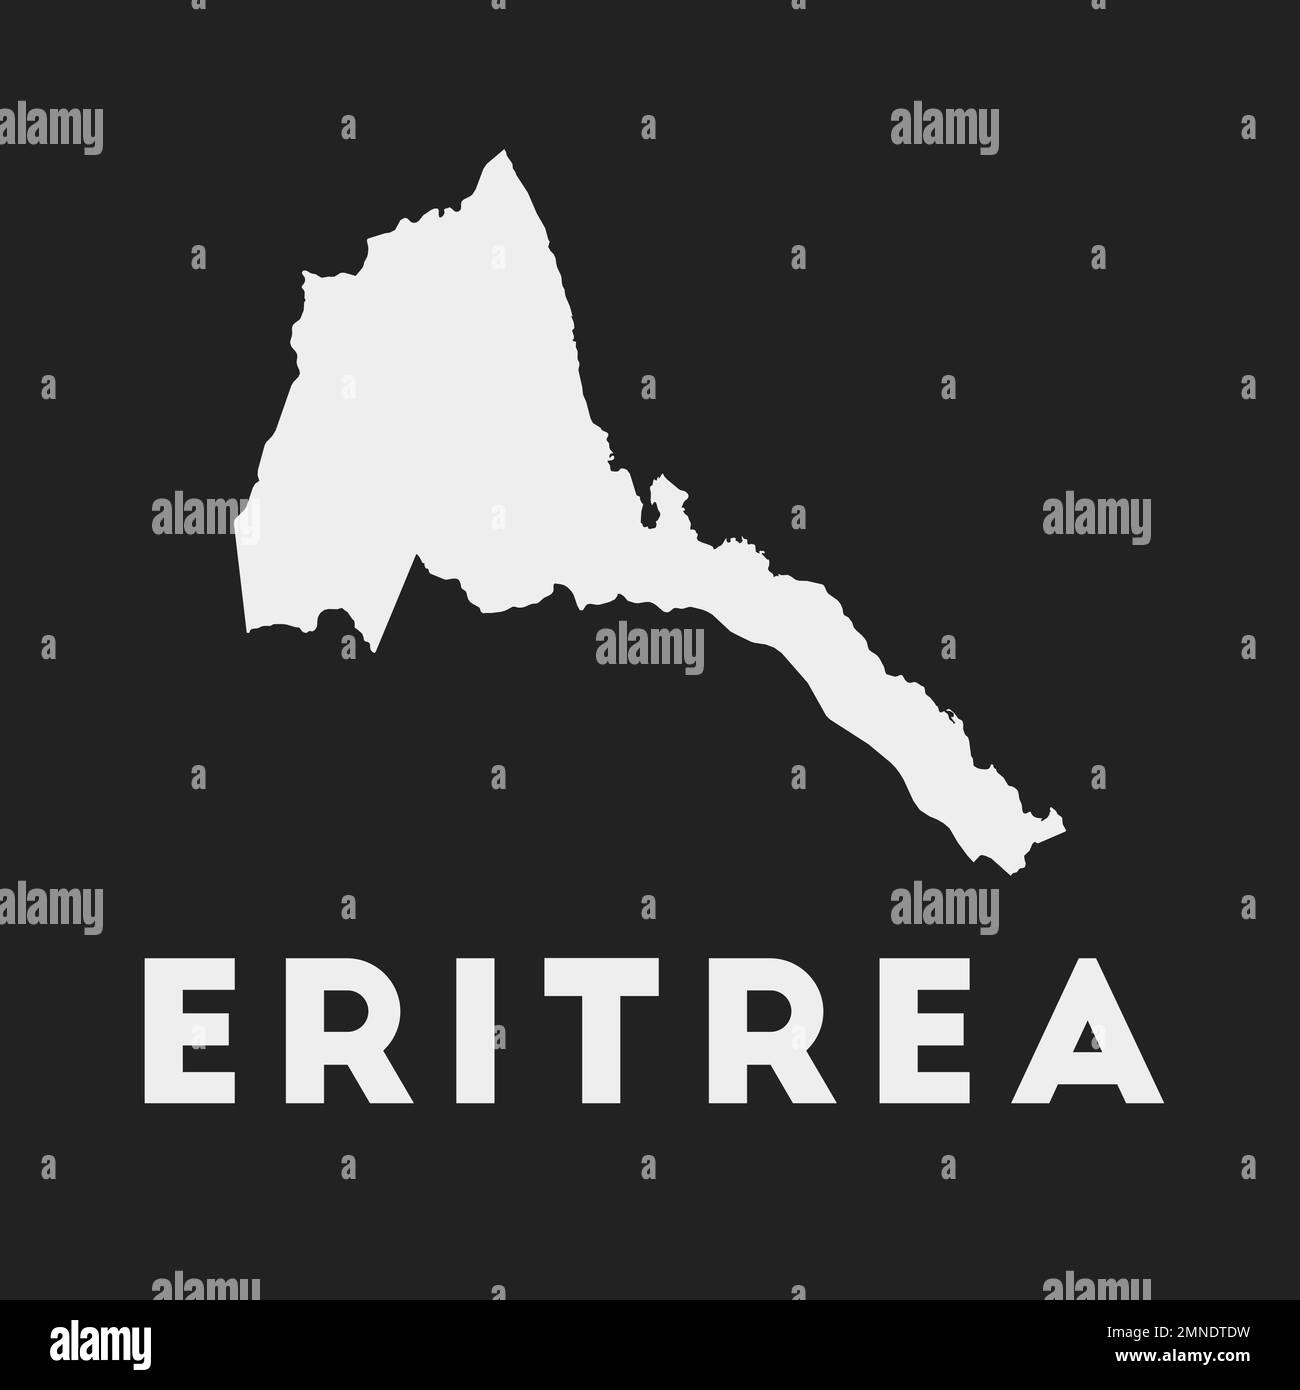 Eritrea icon. Country map on dark background. Stylish Eritrea map with country name. Vector illustration. Stock Vector